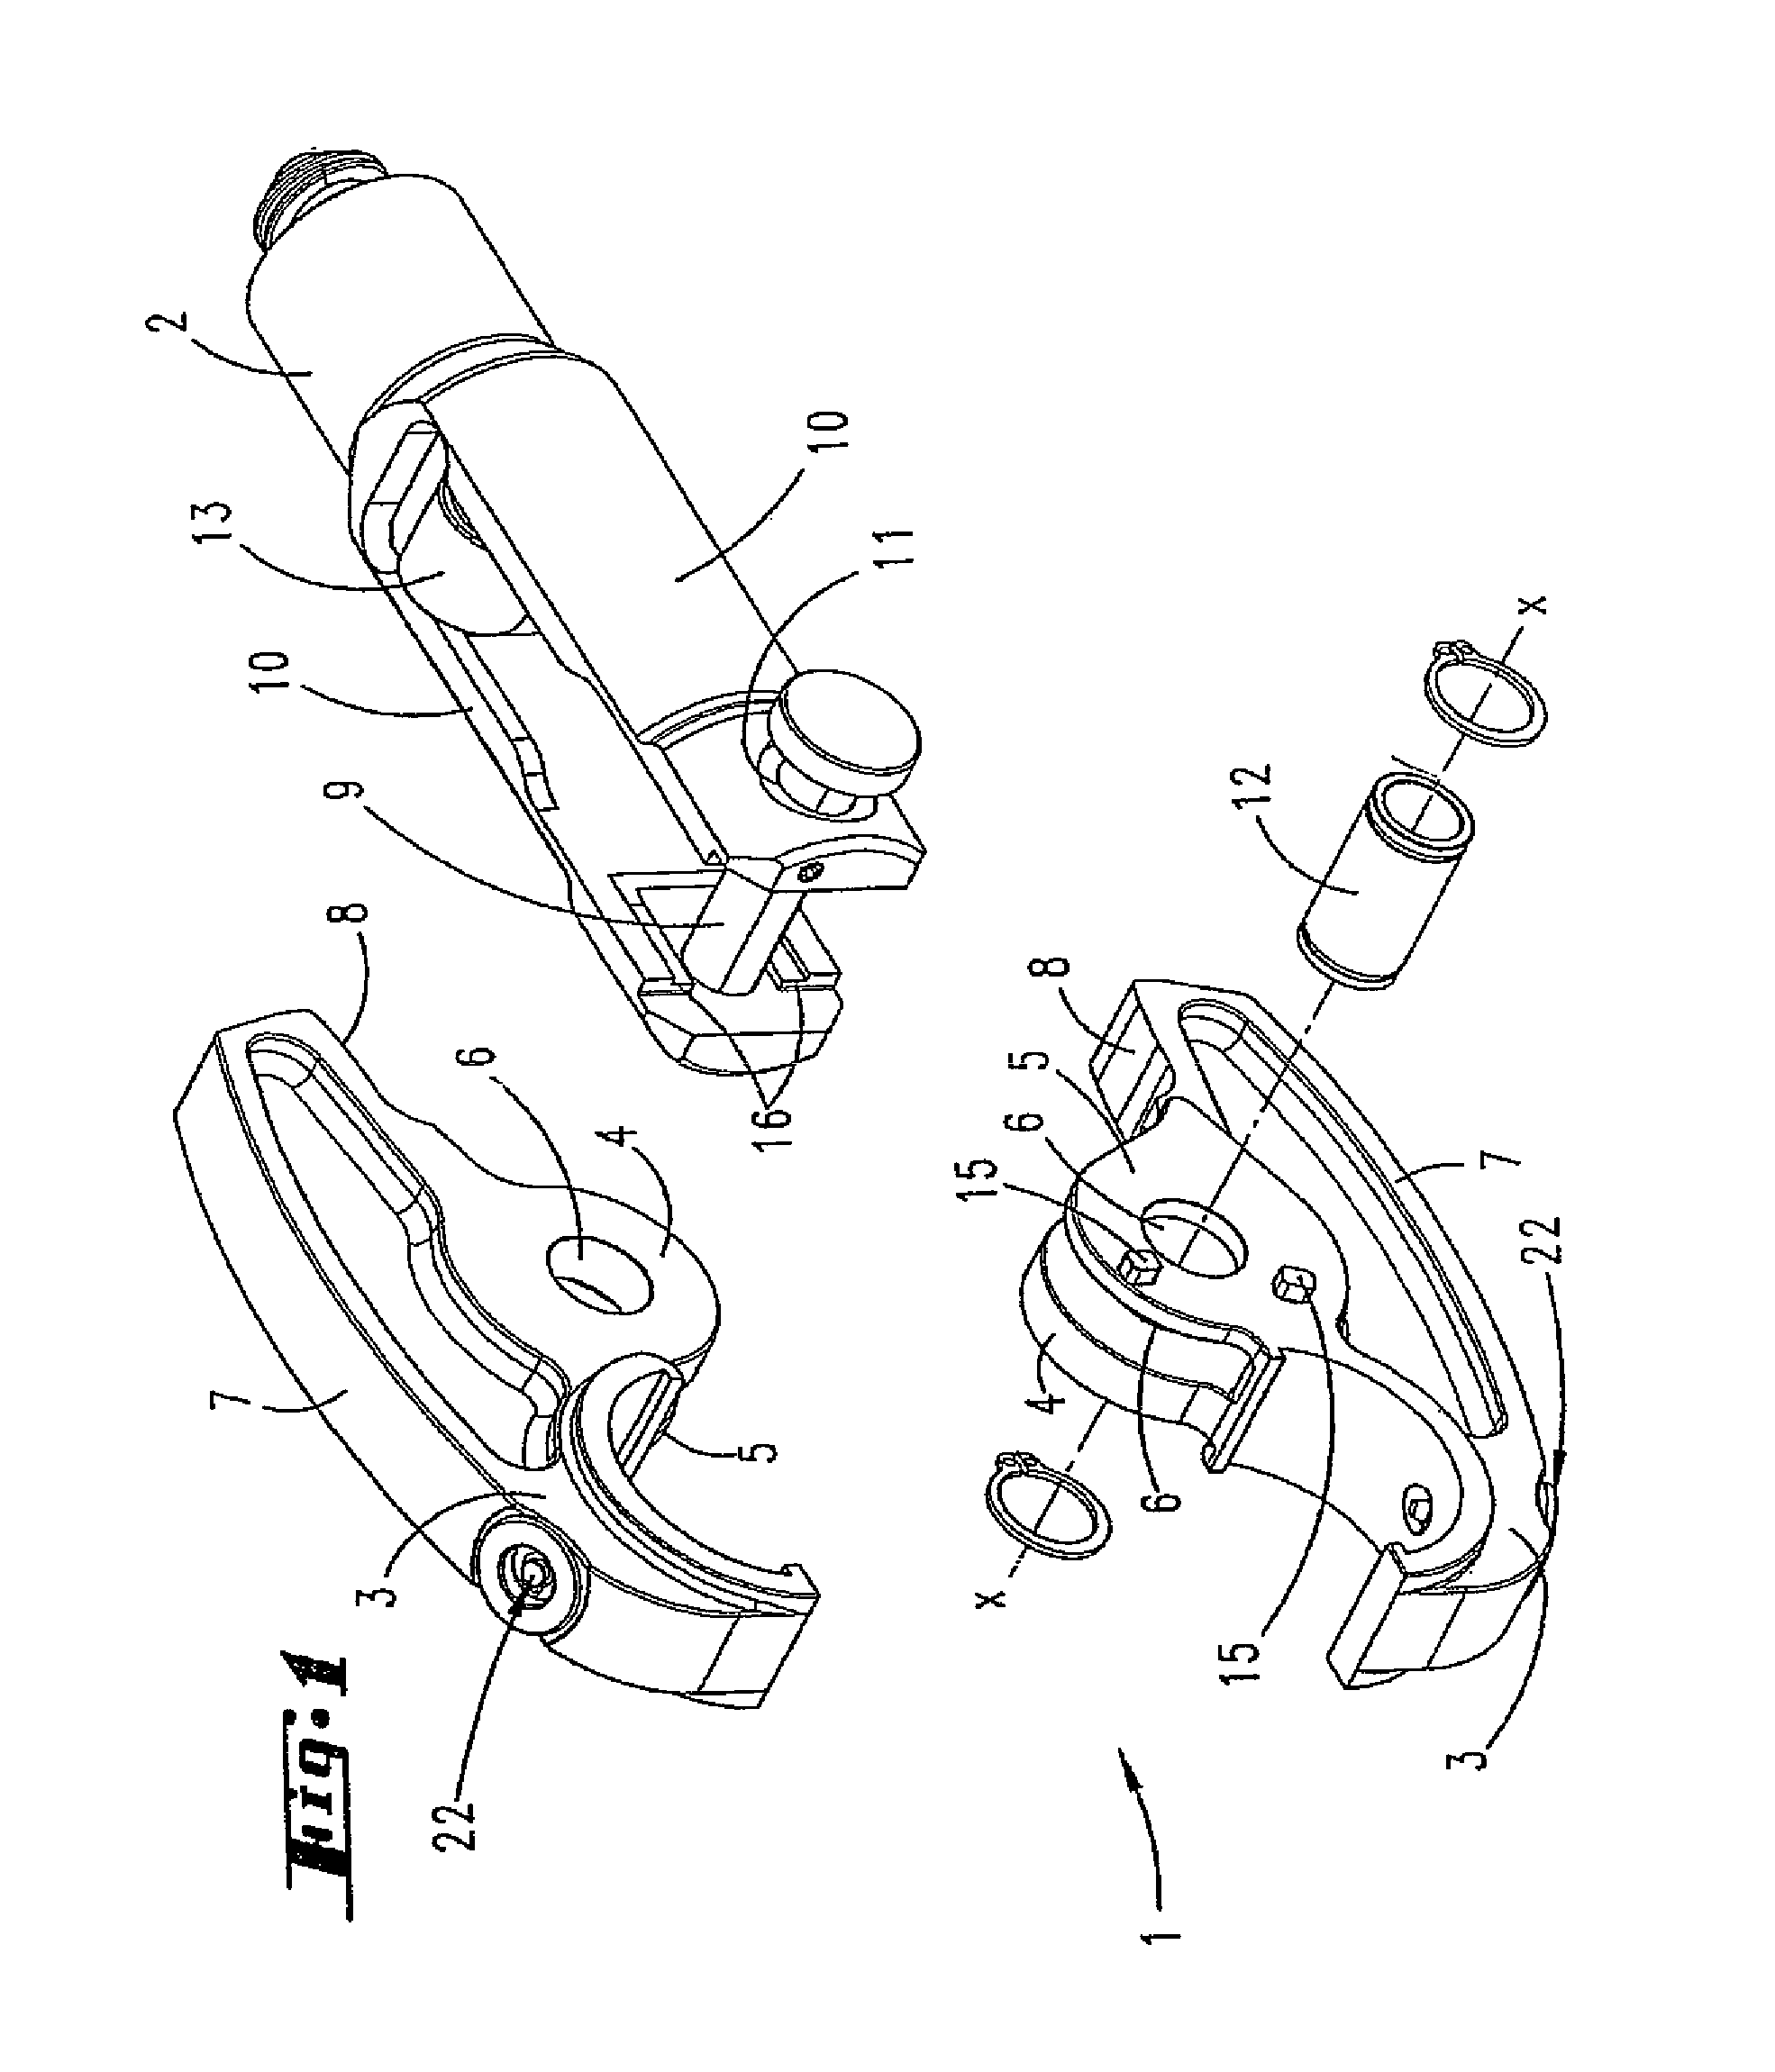 Pair of pressing jaws for hydraulic or electric pressing tool